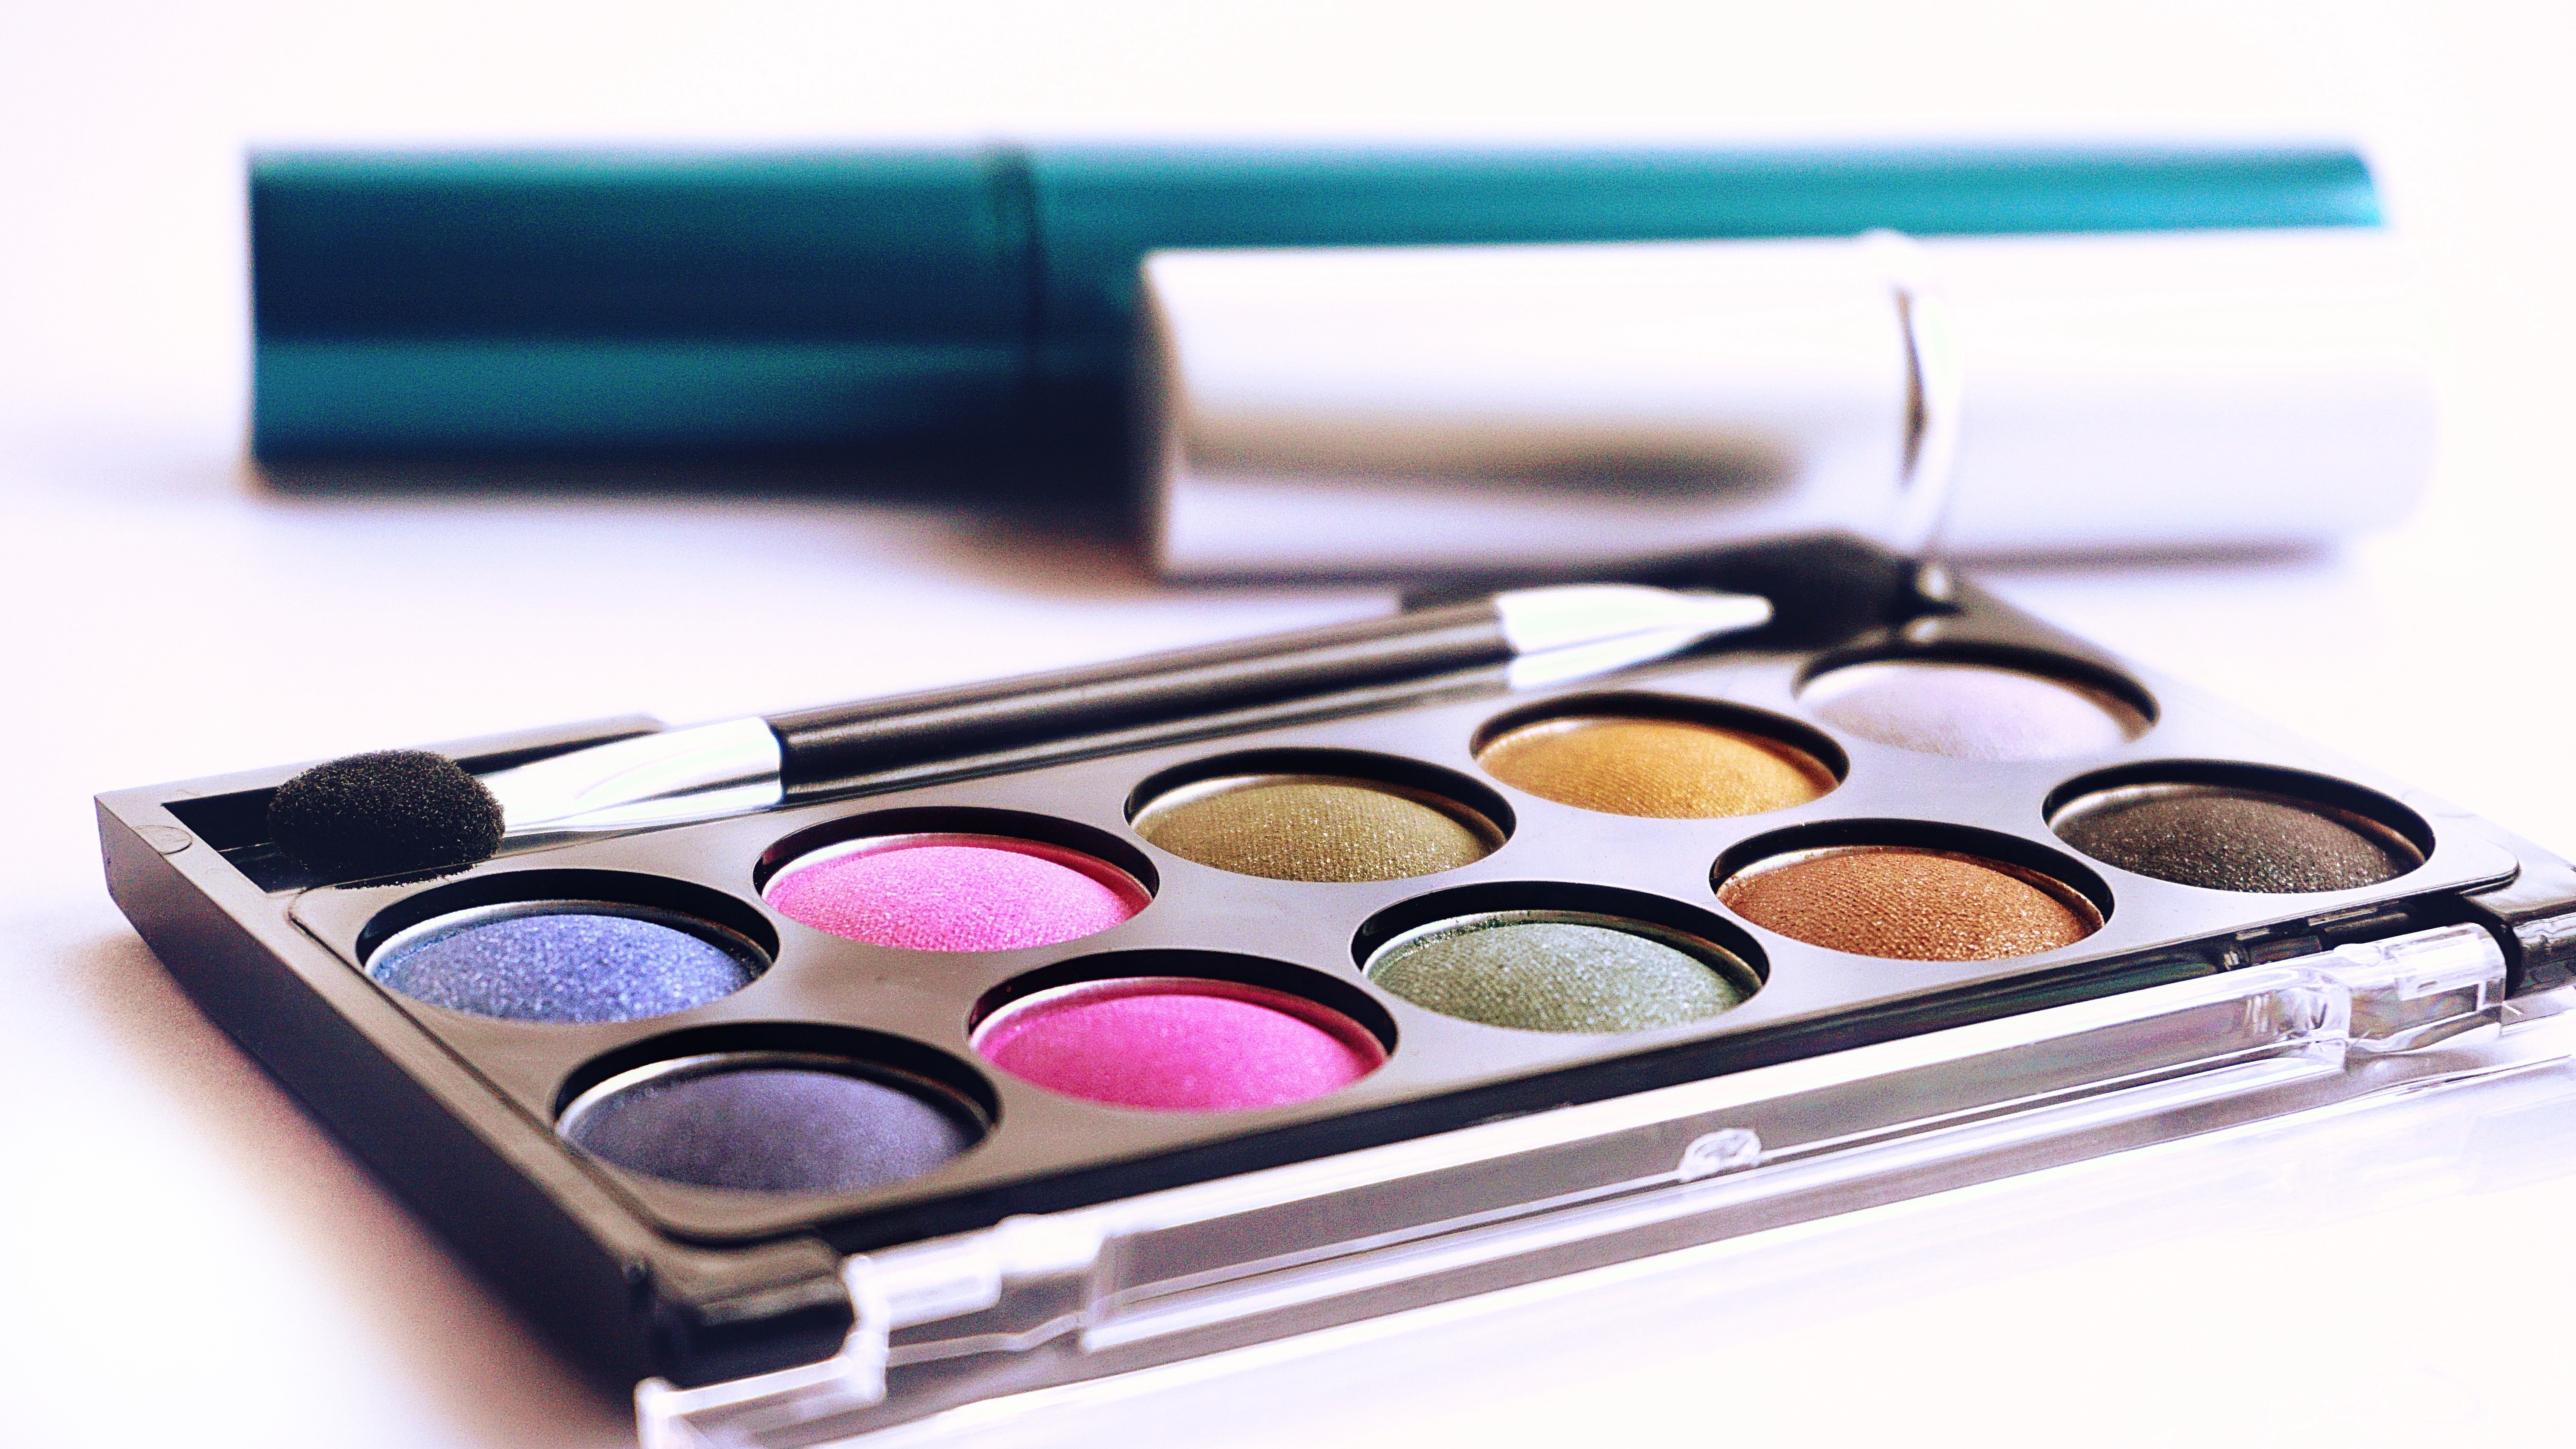 makeup palette - beauty industry growth concept image